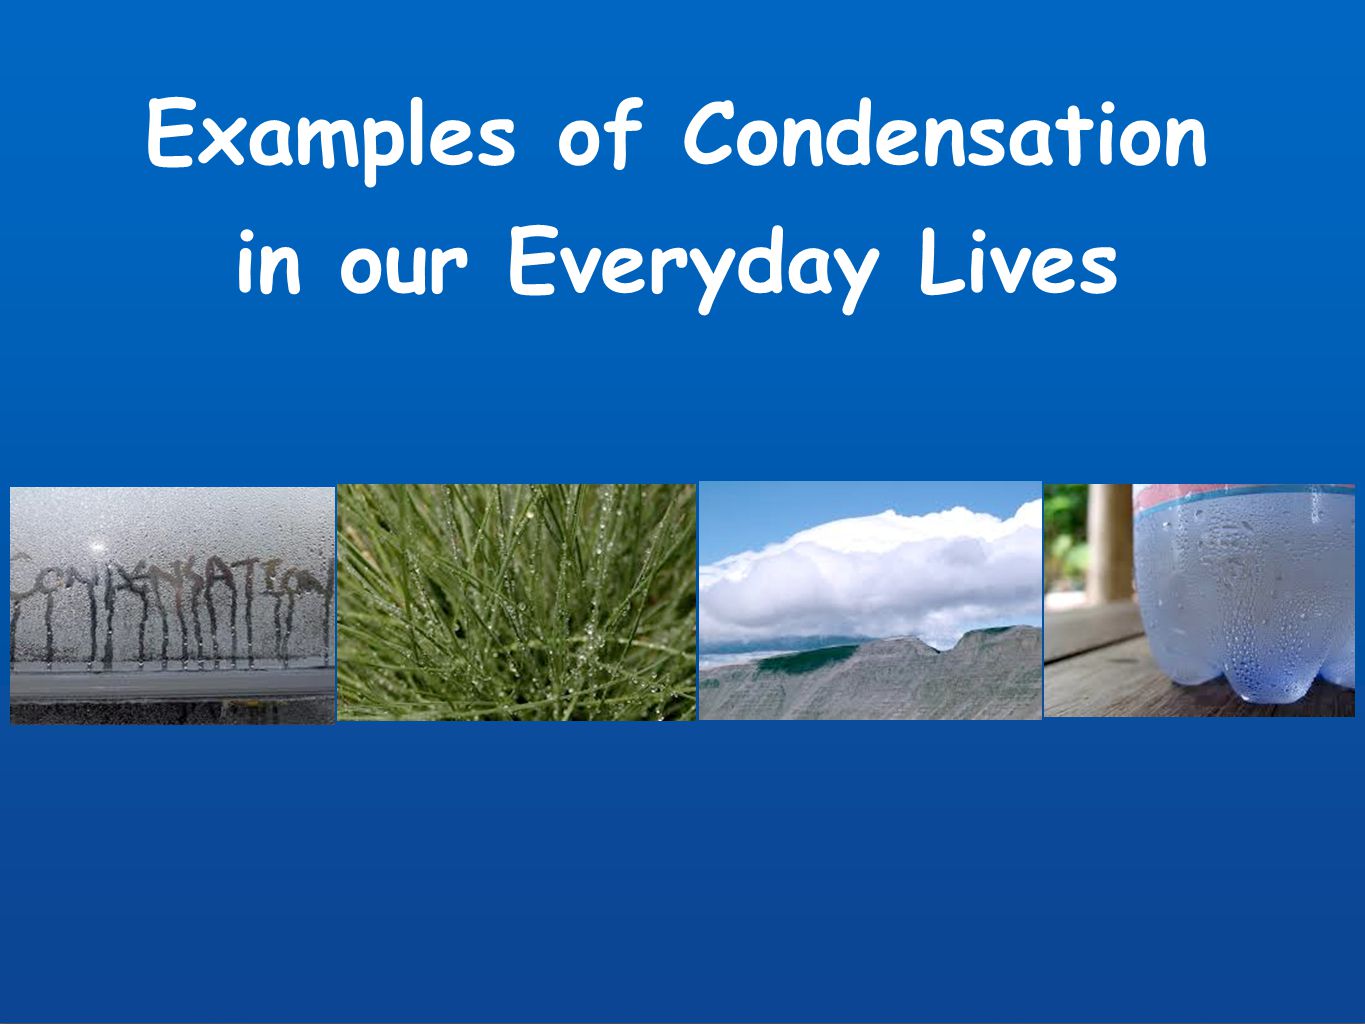 Examples of Condensation in our Everyday Lives